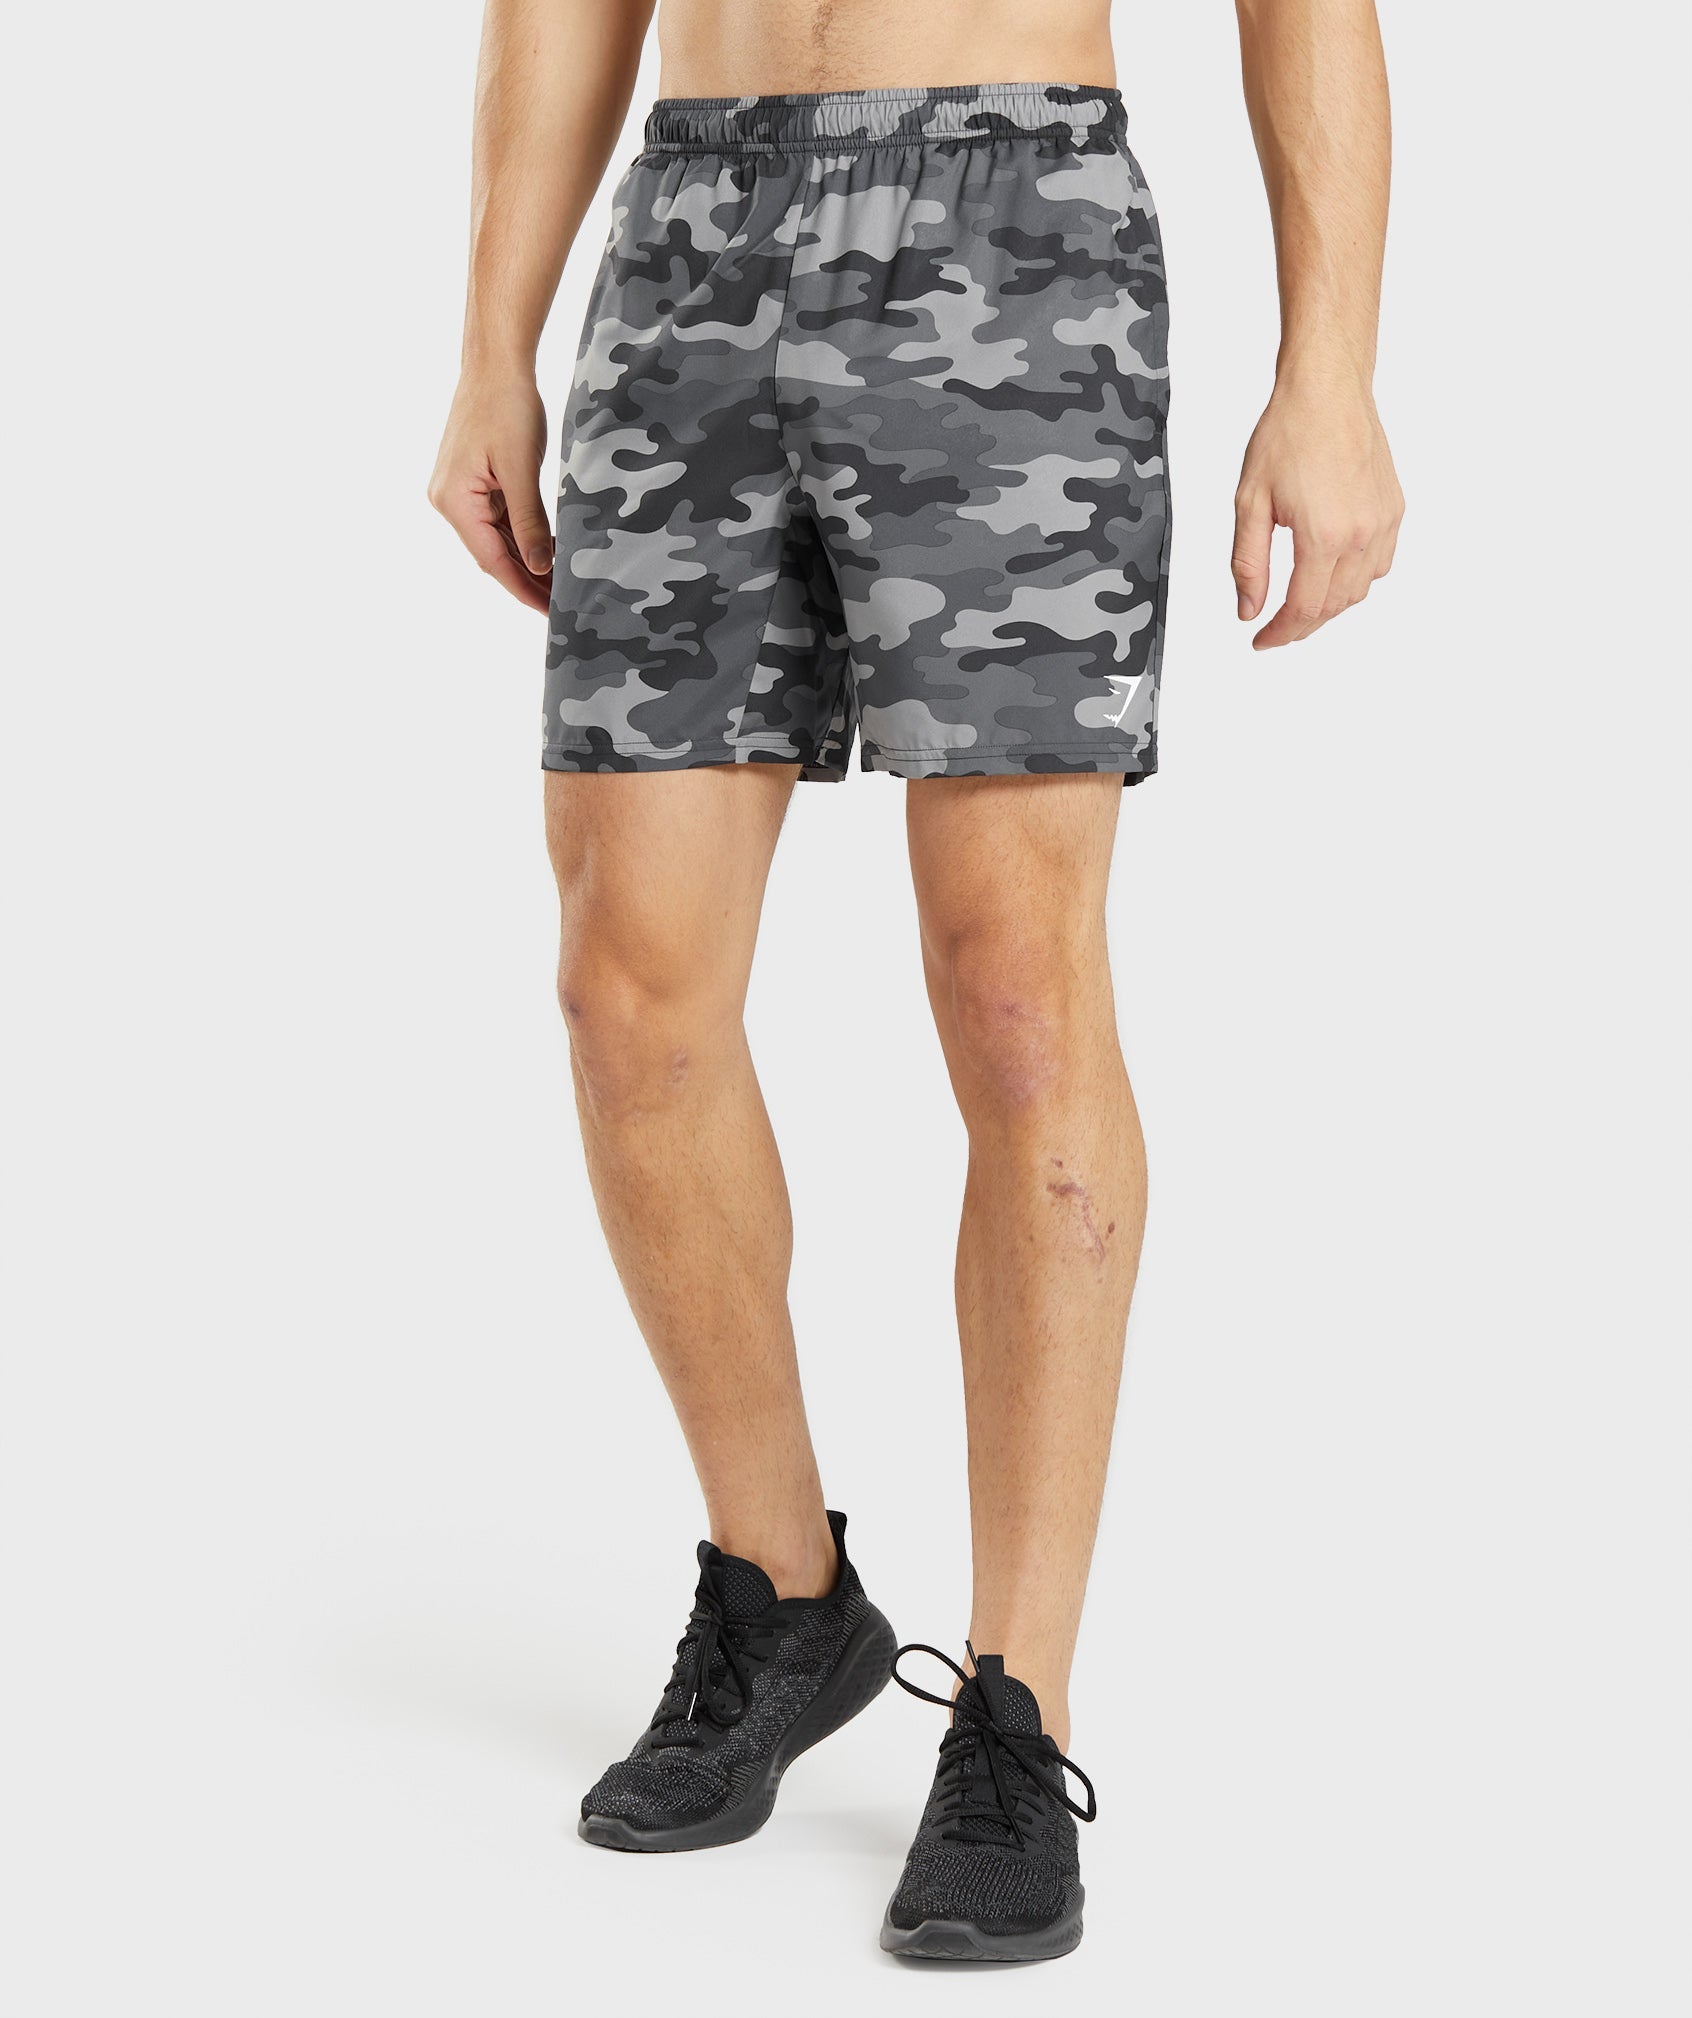 Arrival 7" Shorts in Grey Print